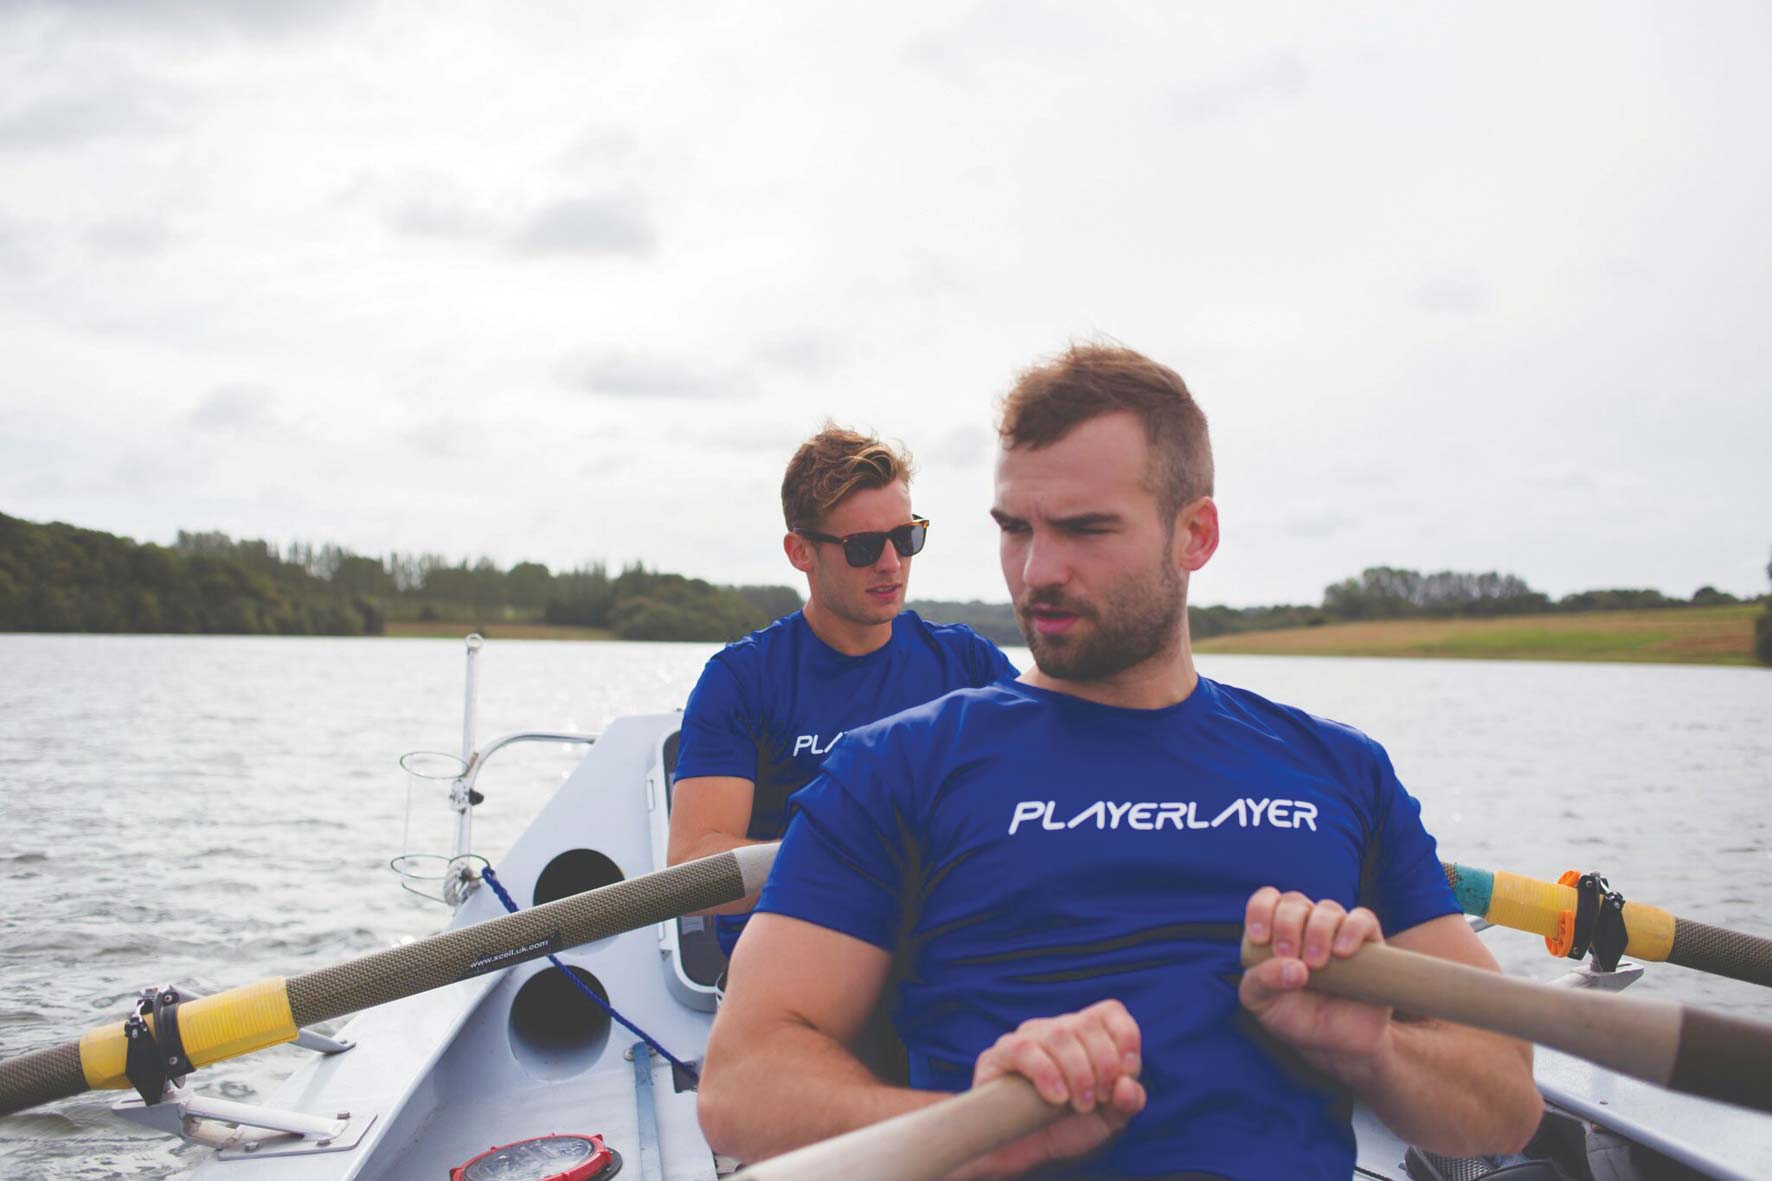 Tunbridge Wells friends rescued and forced to abandon Atlantic row